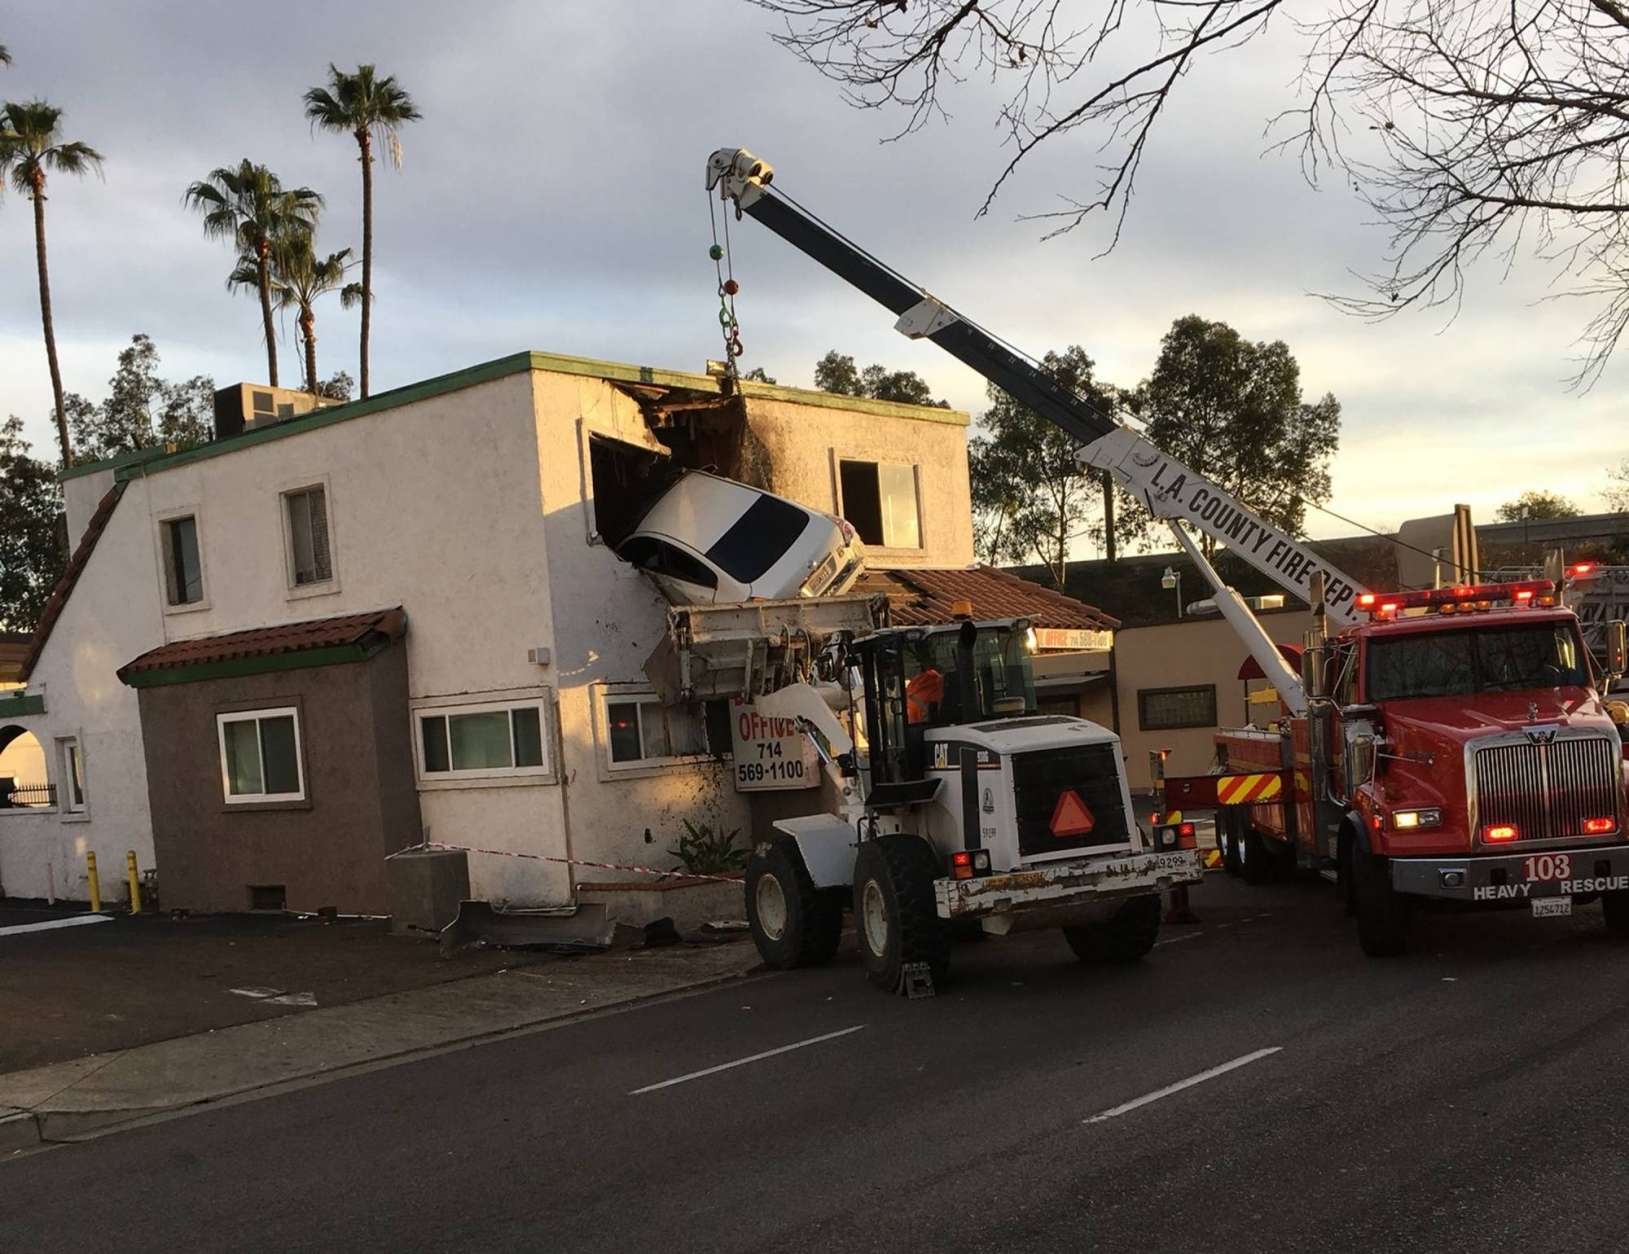 In this Sunday, Jan. 14, 2018, photo provided by Orange County Fire Authorit, a vehicle that crashed into a building hangs from a second story window in Santa Ana, Calif. Members from Orange County Fire Authority and Los Angeles County Urban Search &amp; Rescue rescued two people, who escaped serious injuries when the car they were in went airborne and slammed into the second floor of a dental office in Southern California. Authorities say the Nissan Altima hit a center divider early Sunday, soared into the air and plowed into the top floor of the two-story structure. (Capt. Stephen Horner /Orange County Fire Authority via AP)